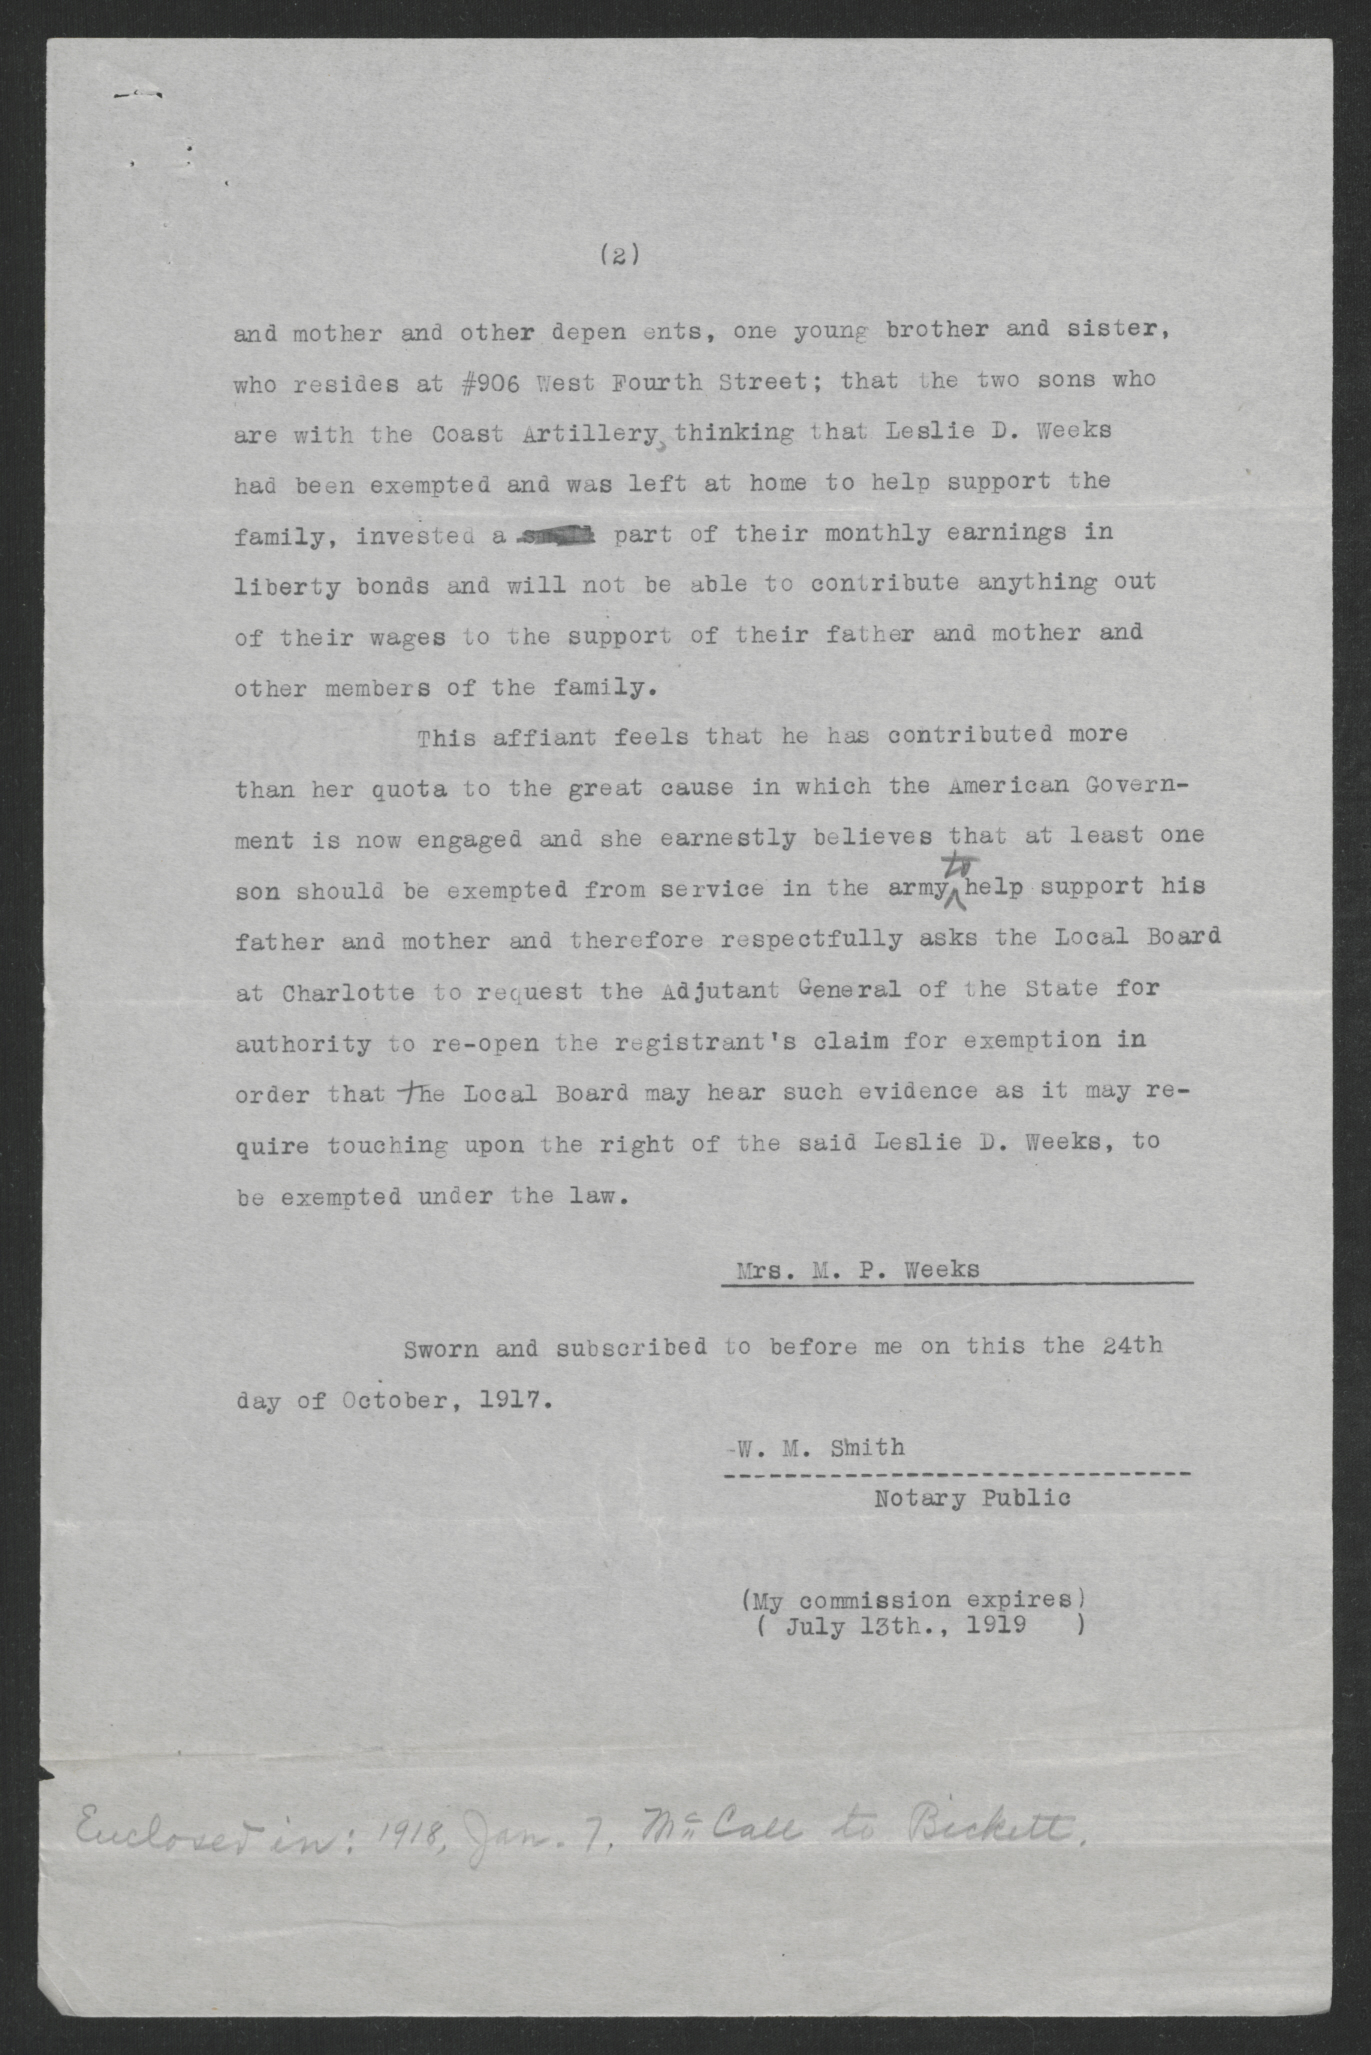 Affidavit of Mary P. D. Weeks, October 24, 1917, page 2